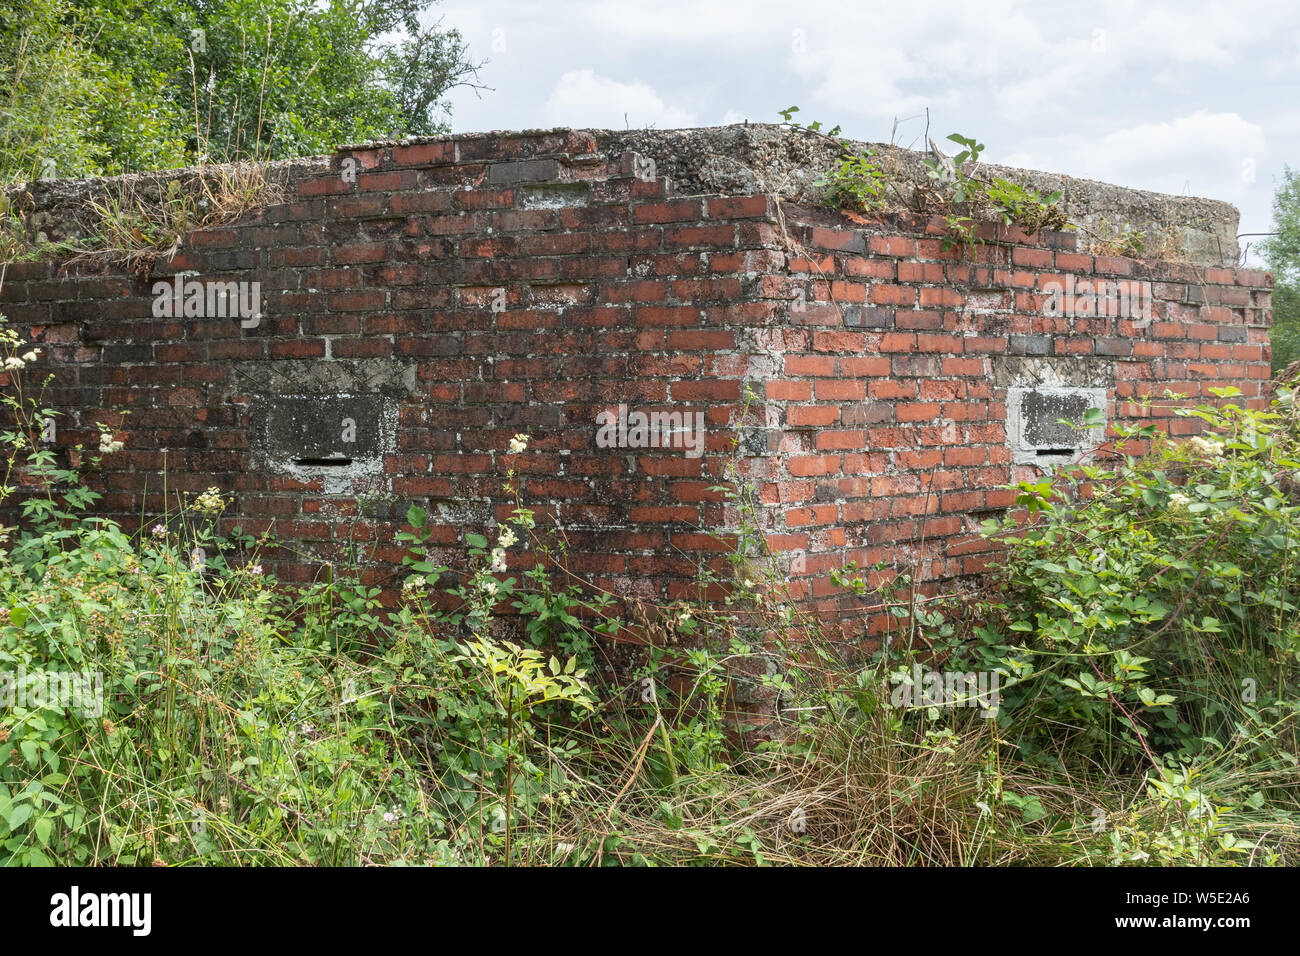 Pillbox from the second world war restored as a home for bats. Wildlife conservation, UK. Stock Photo